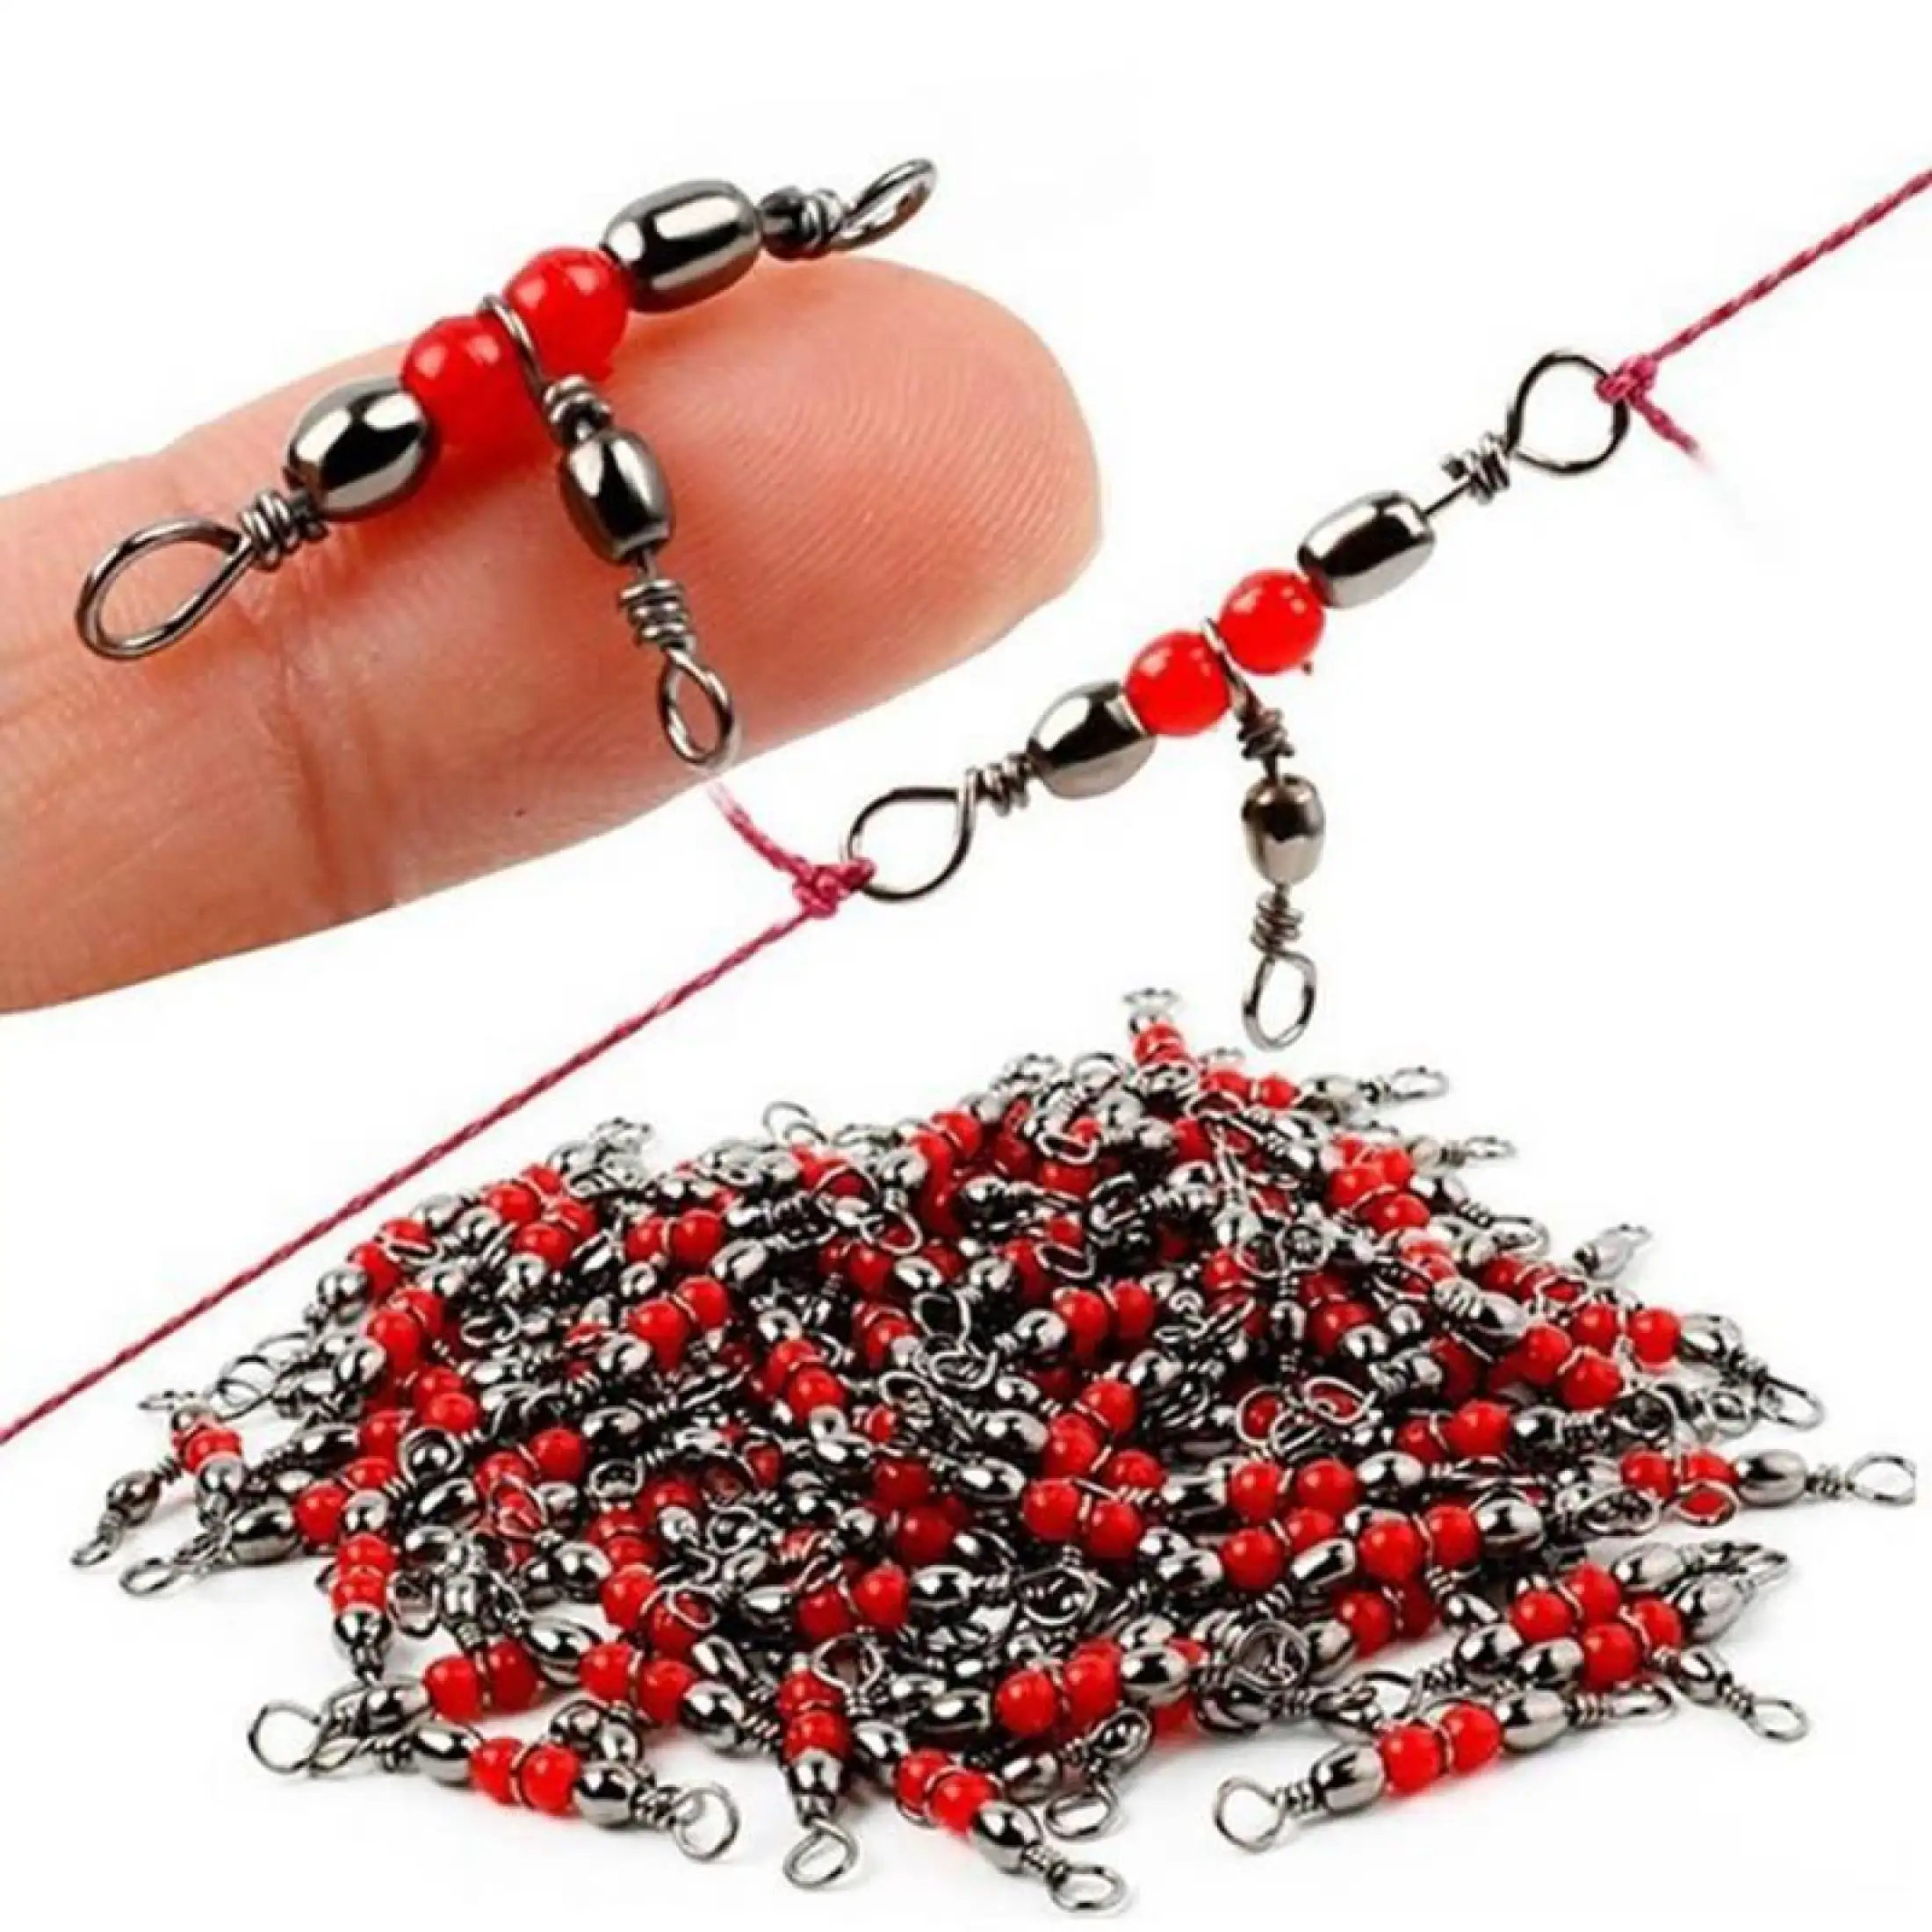 10Pcs T Shape Fishing Swivel Bearing Connector Solid Fishhook Ring Lure Line New